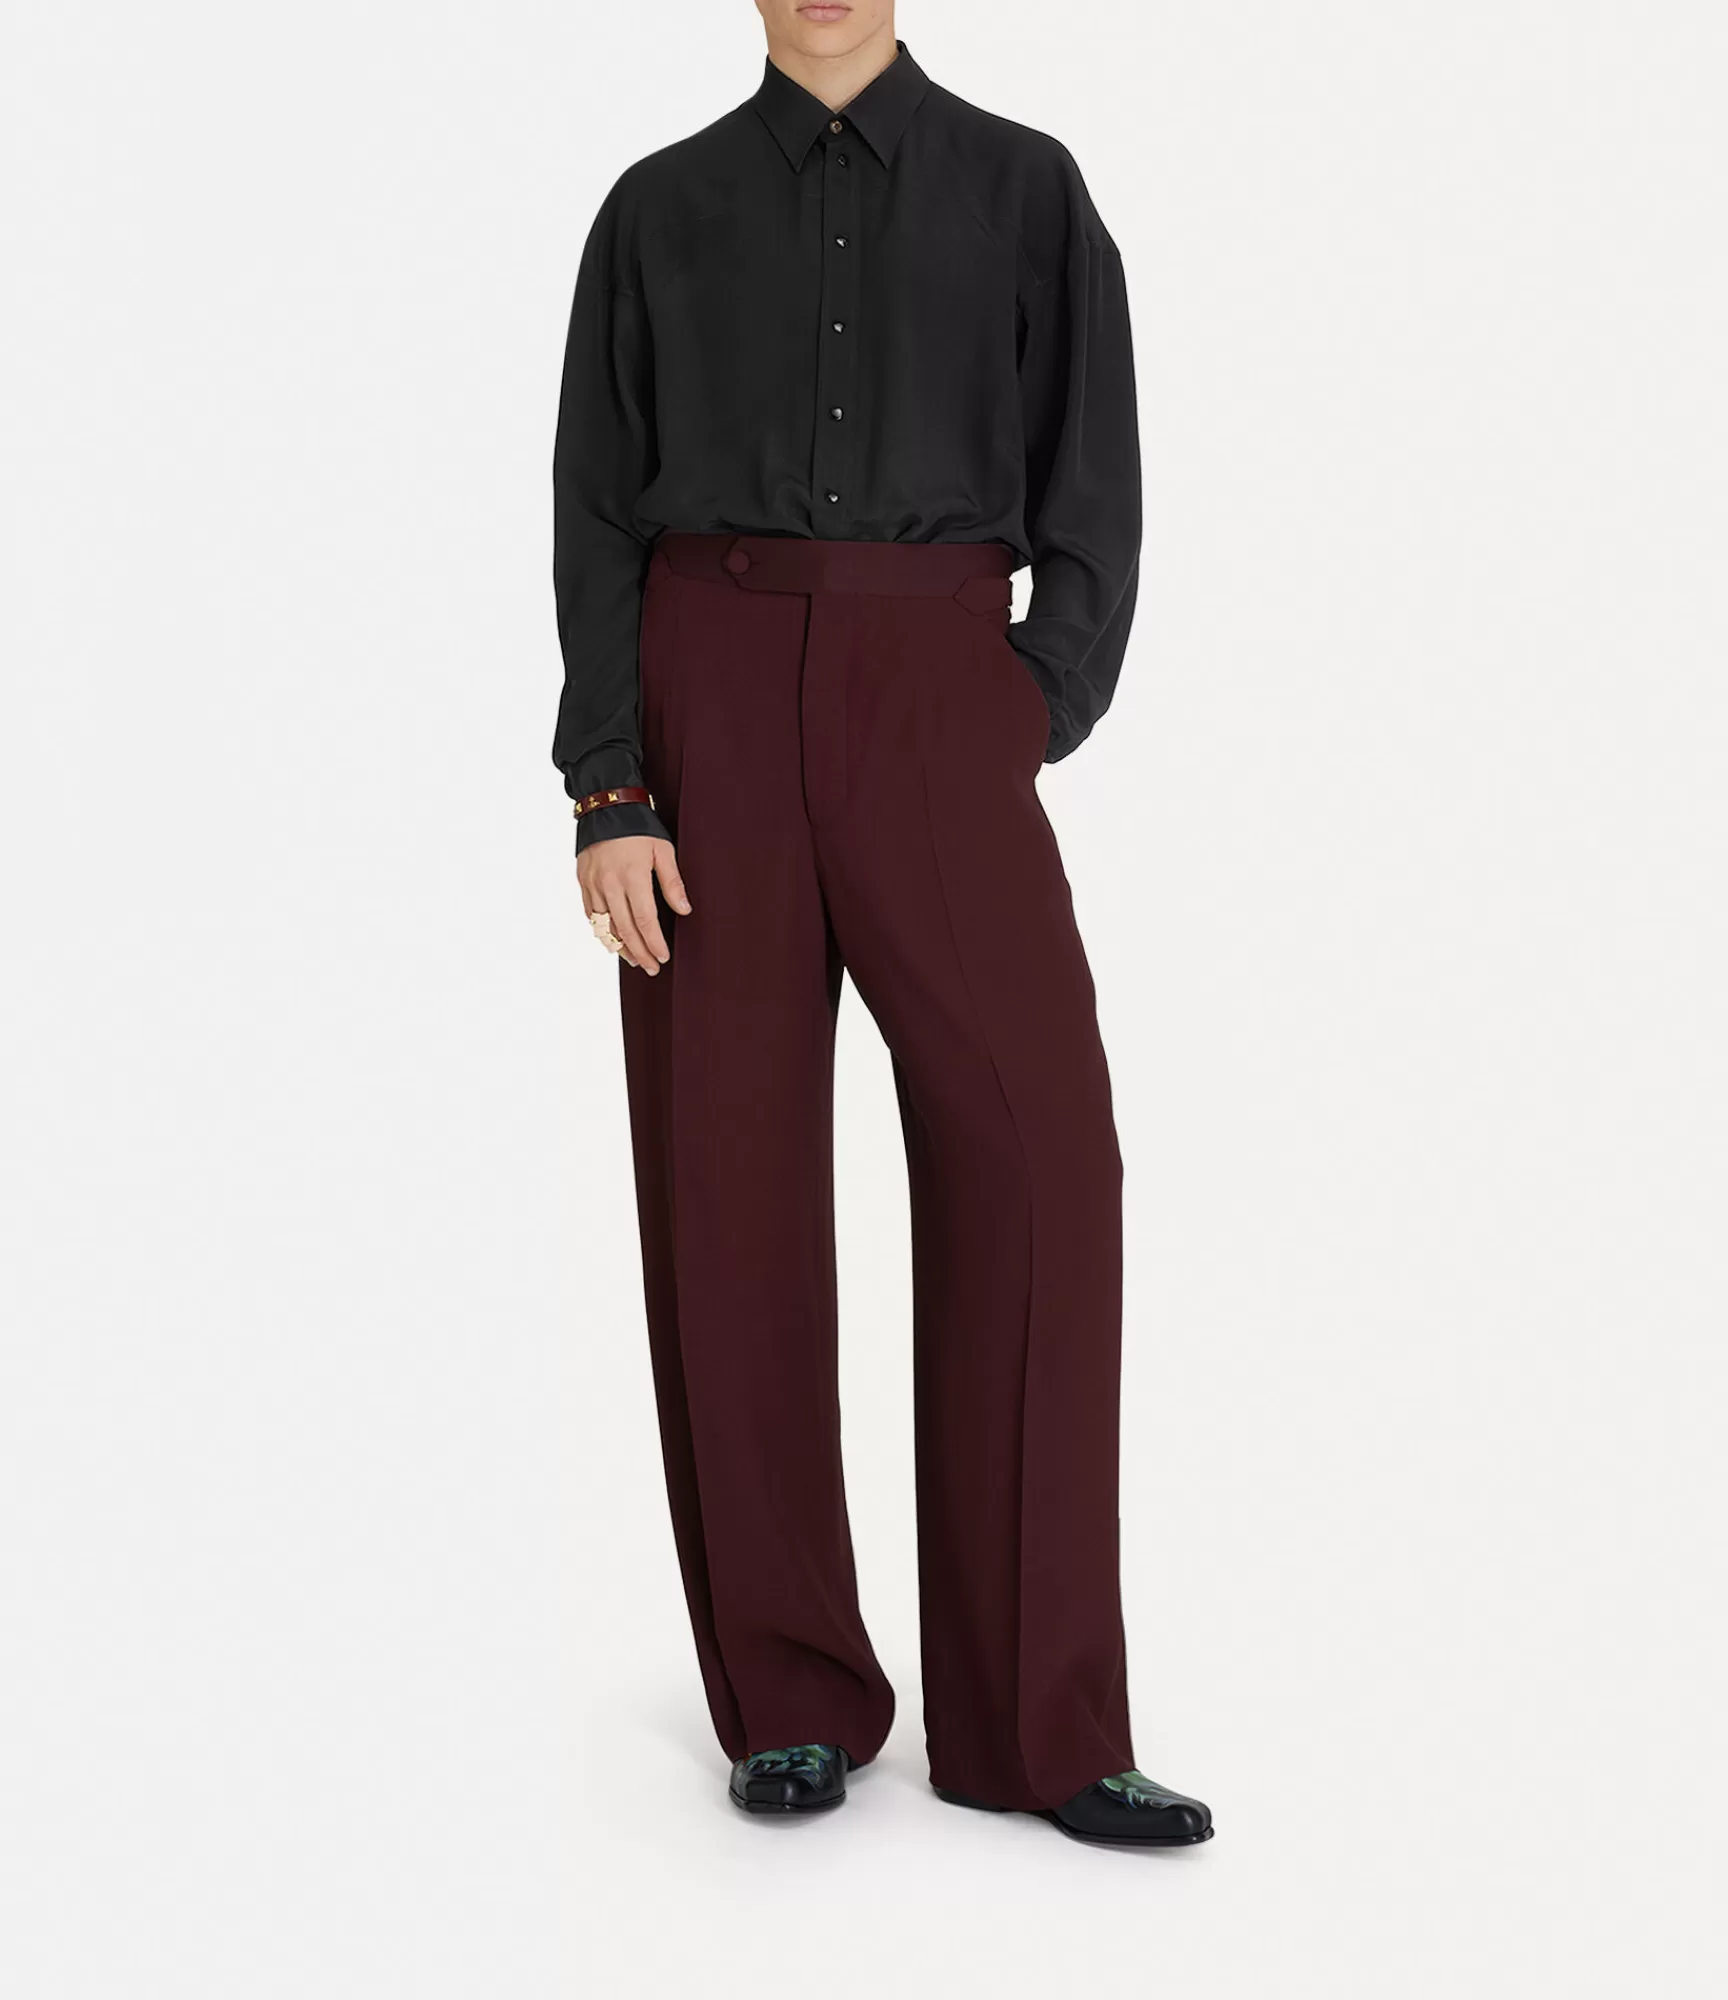 Vivienne Westwood Trousers and Shorts*Humphrey trousers Burgundy